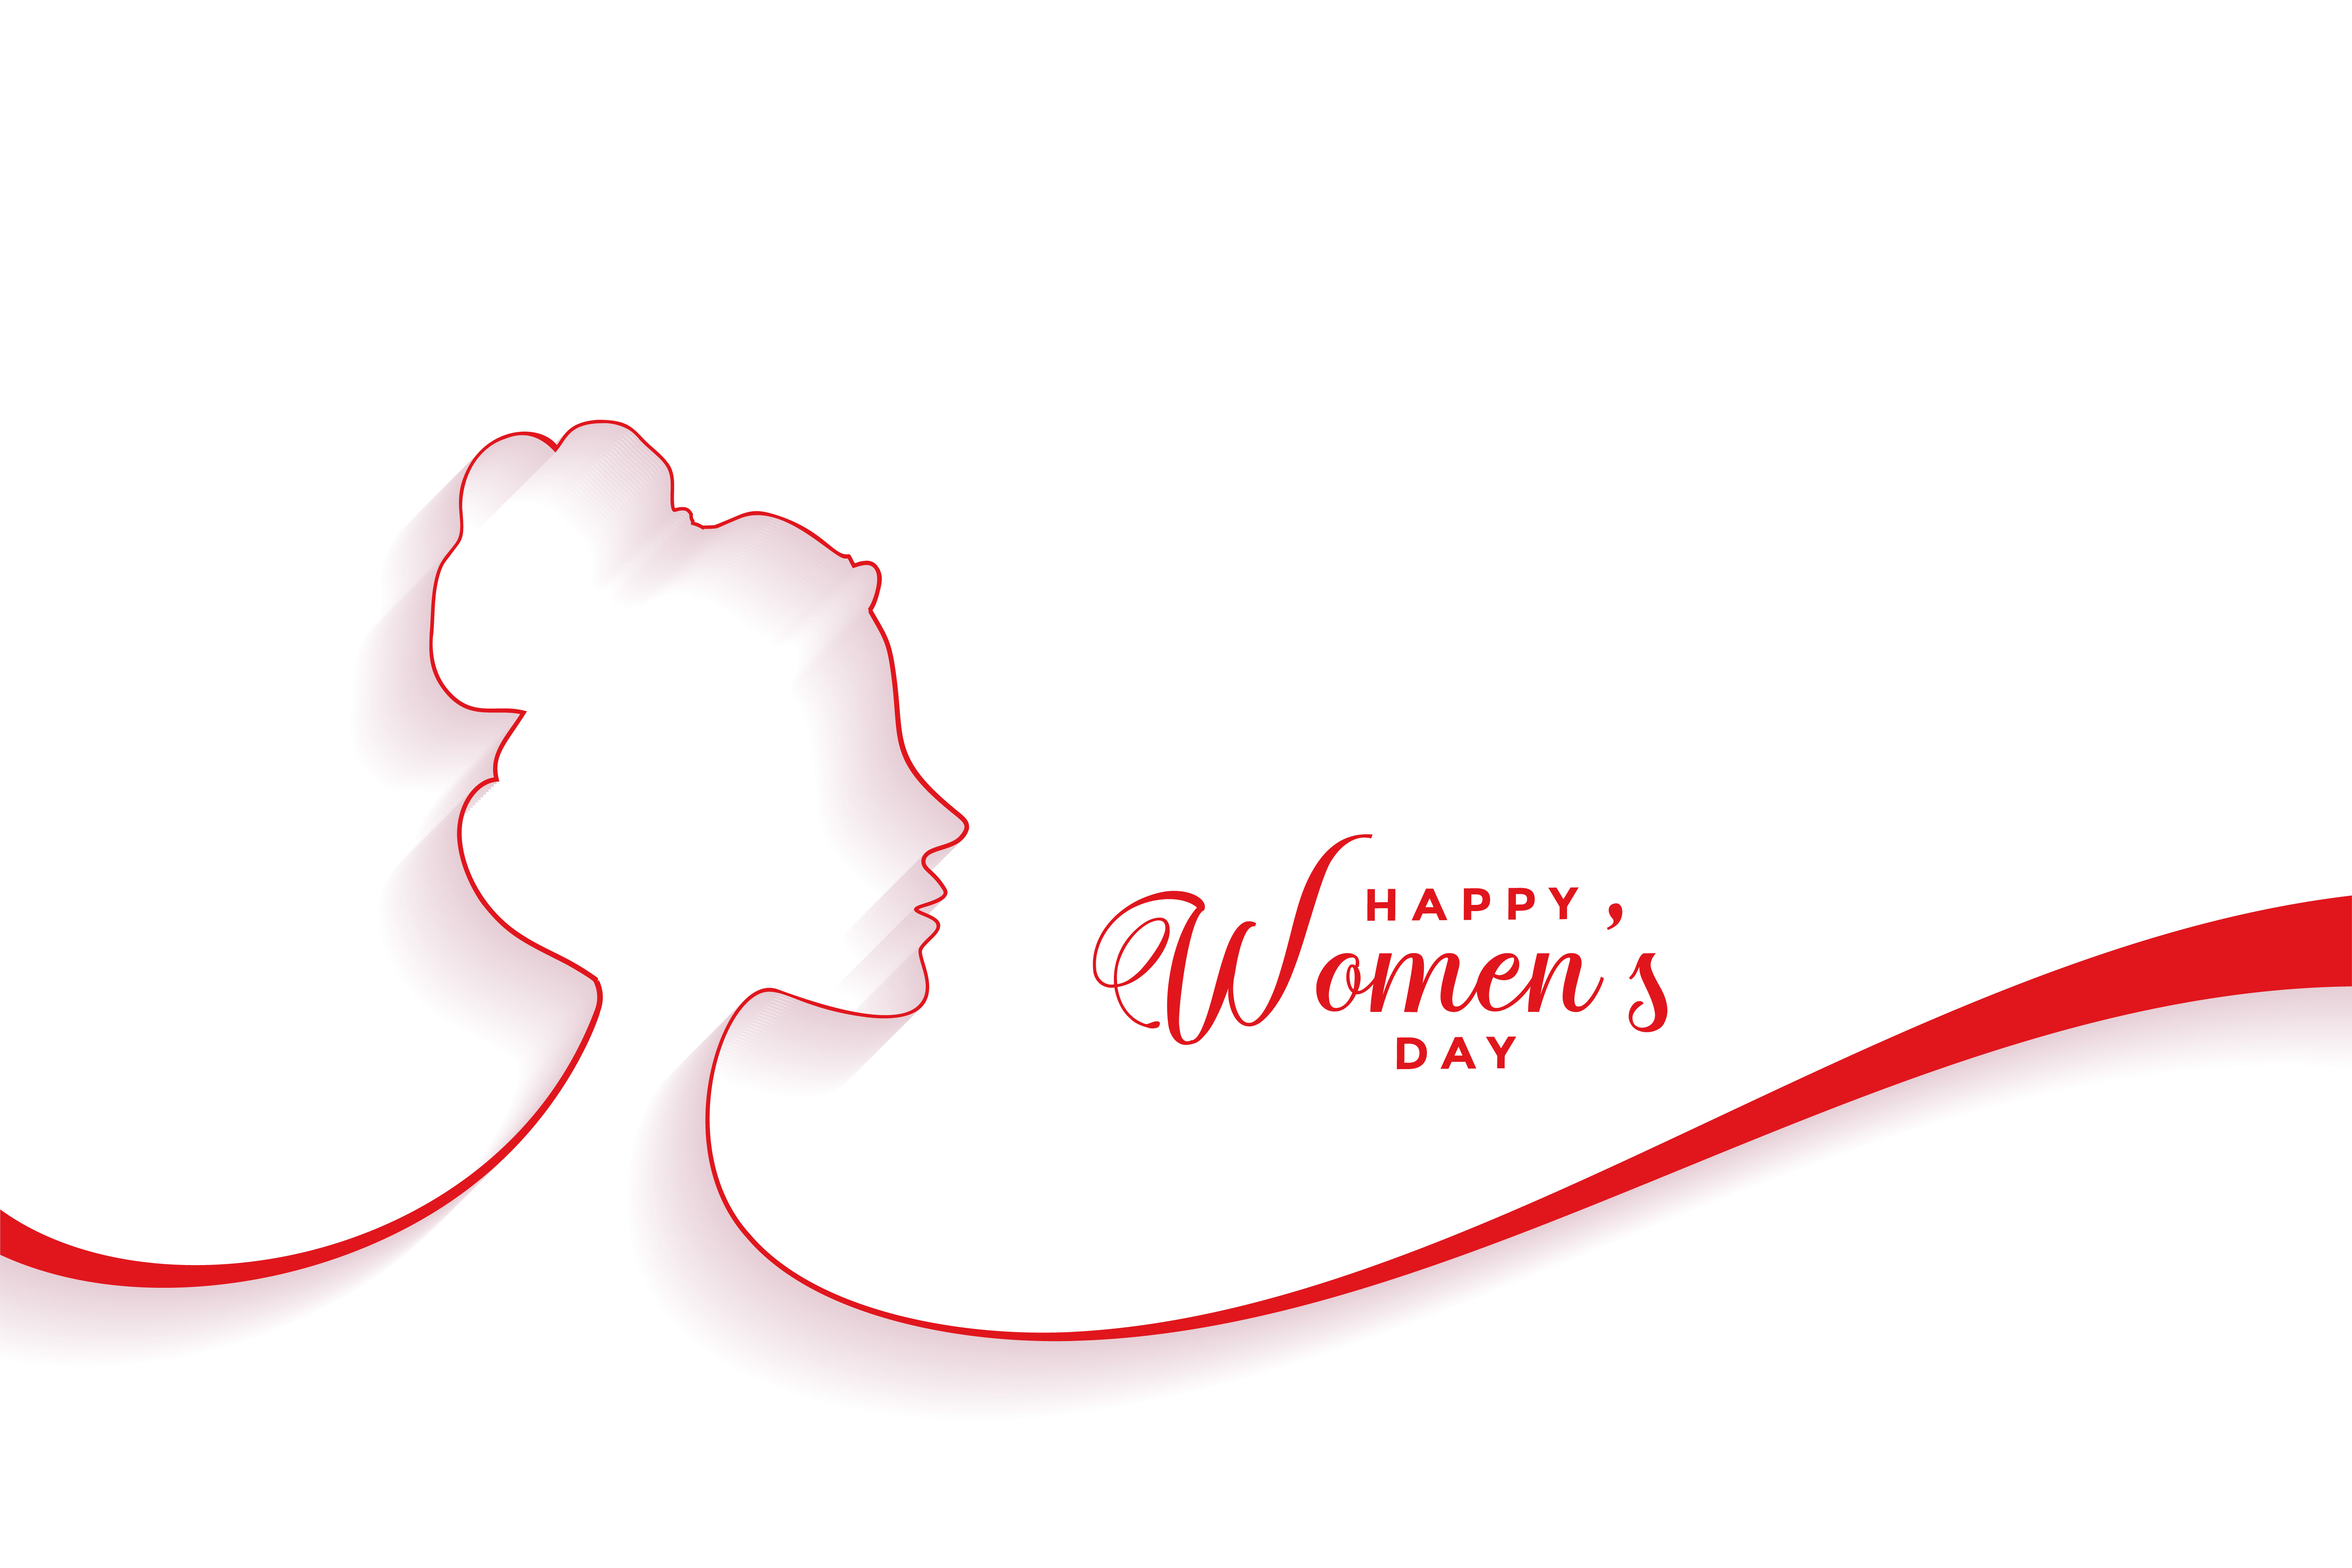 Wishing all of you a very Happy International Women's Day